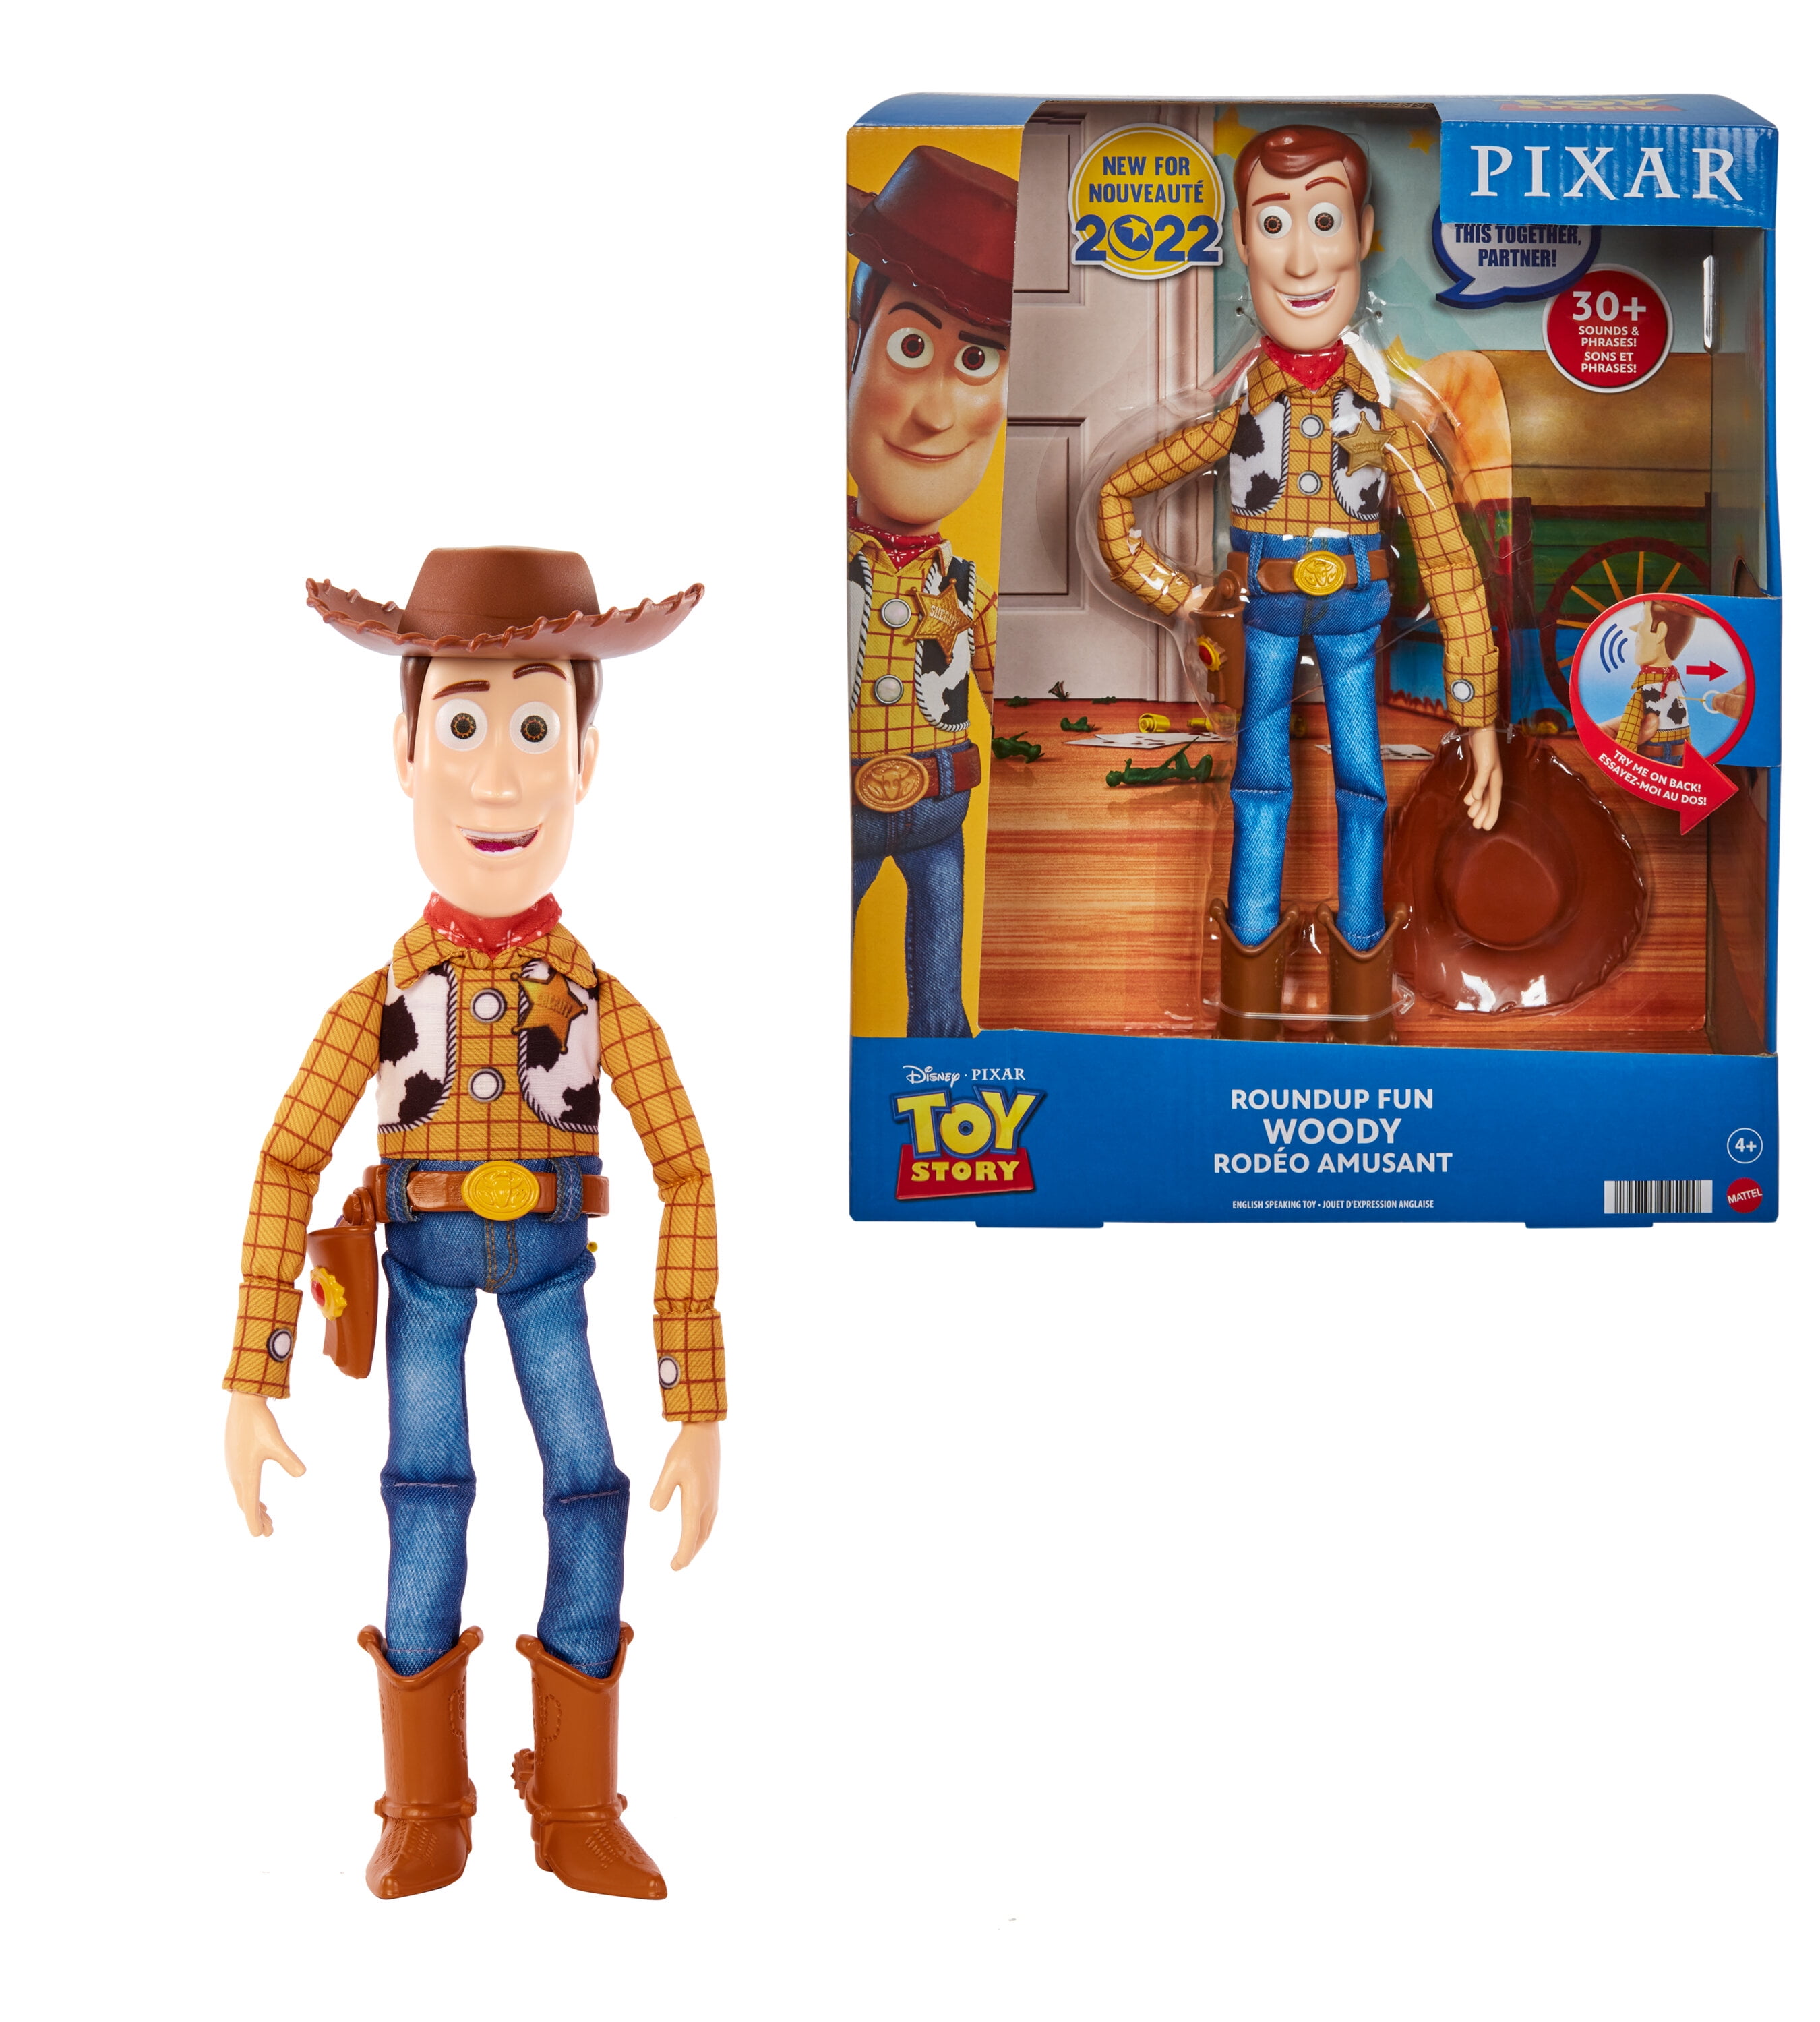 Relive your favorite Pixar moments with these popular toys  Shopping guide  for Pixar toys, Woody, Buzz Lightyear, and more - ABC13 Houston